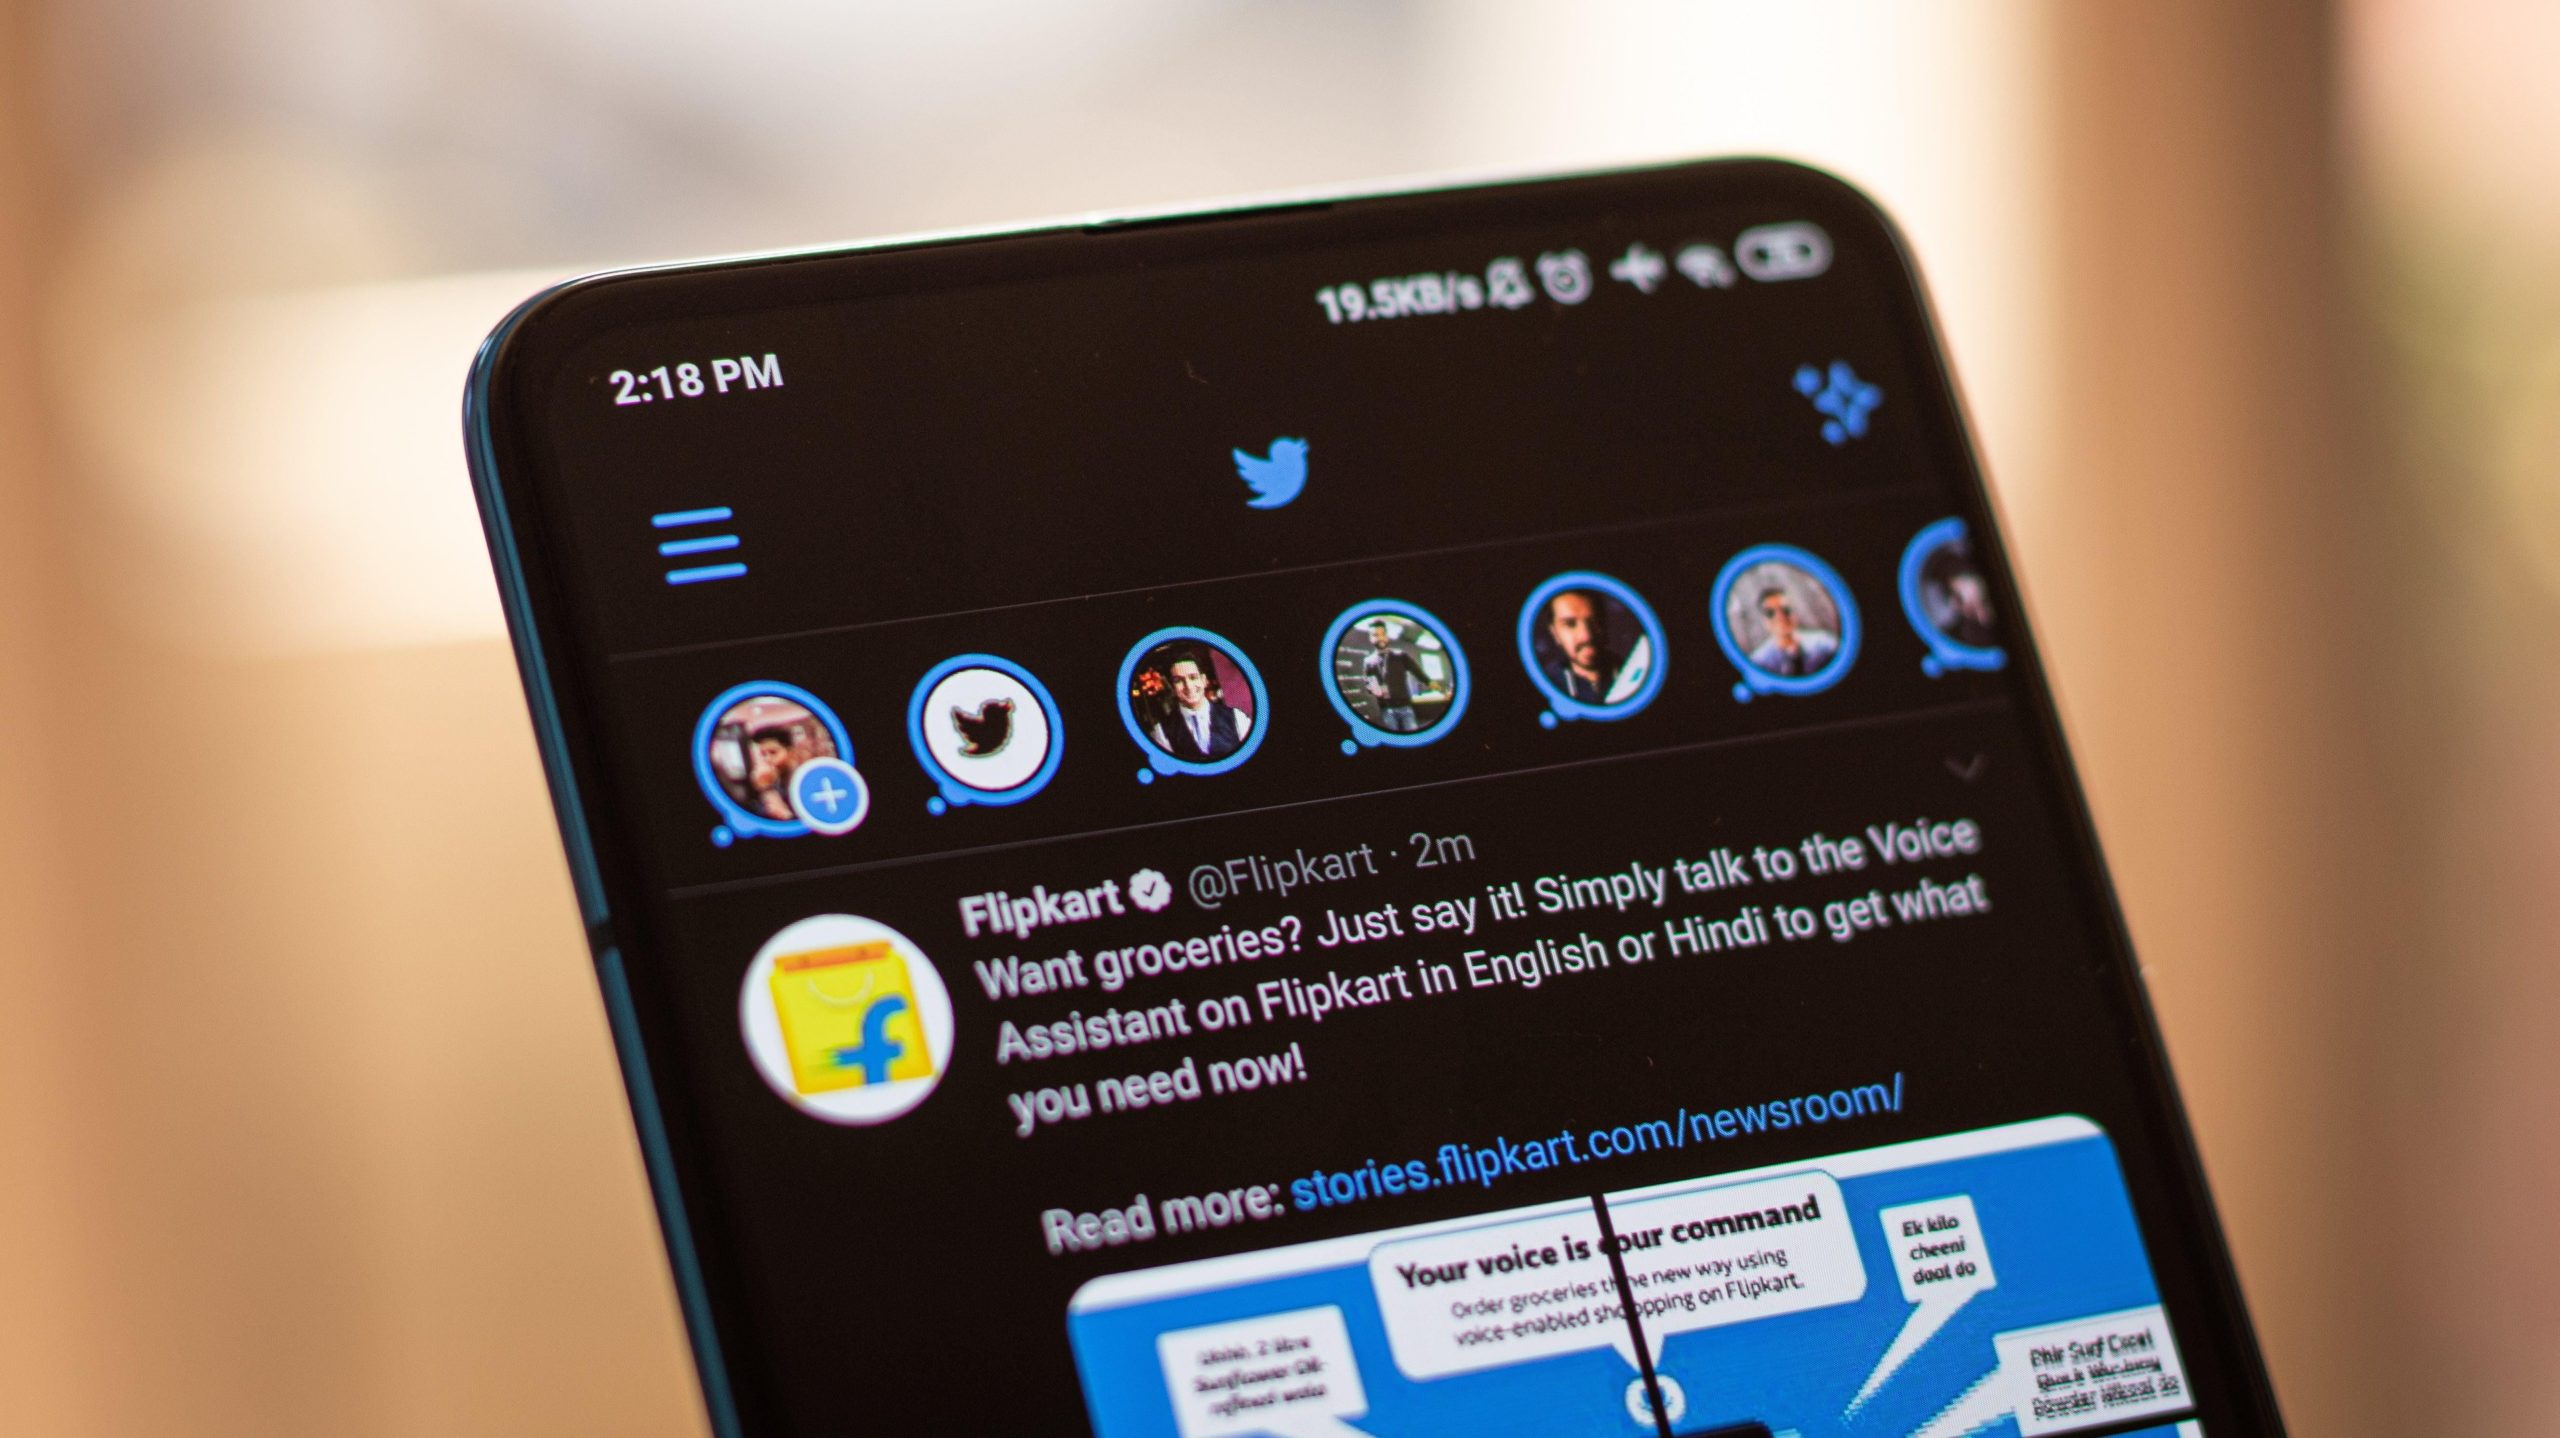 You Can Finally Stop Changing Twitter From Light to Dark Mode Yourself